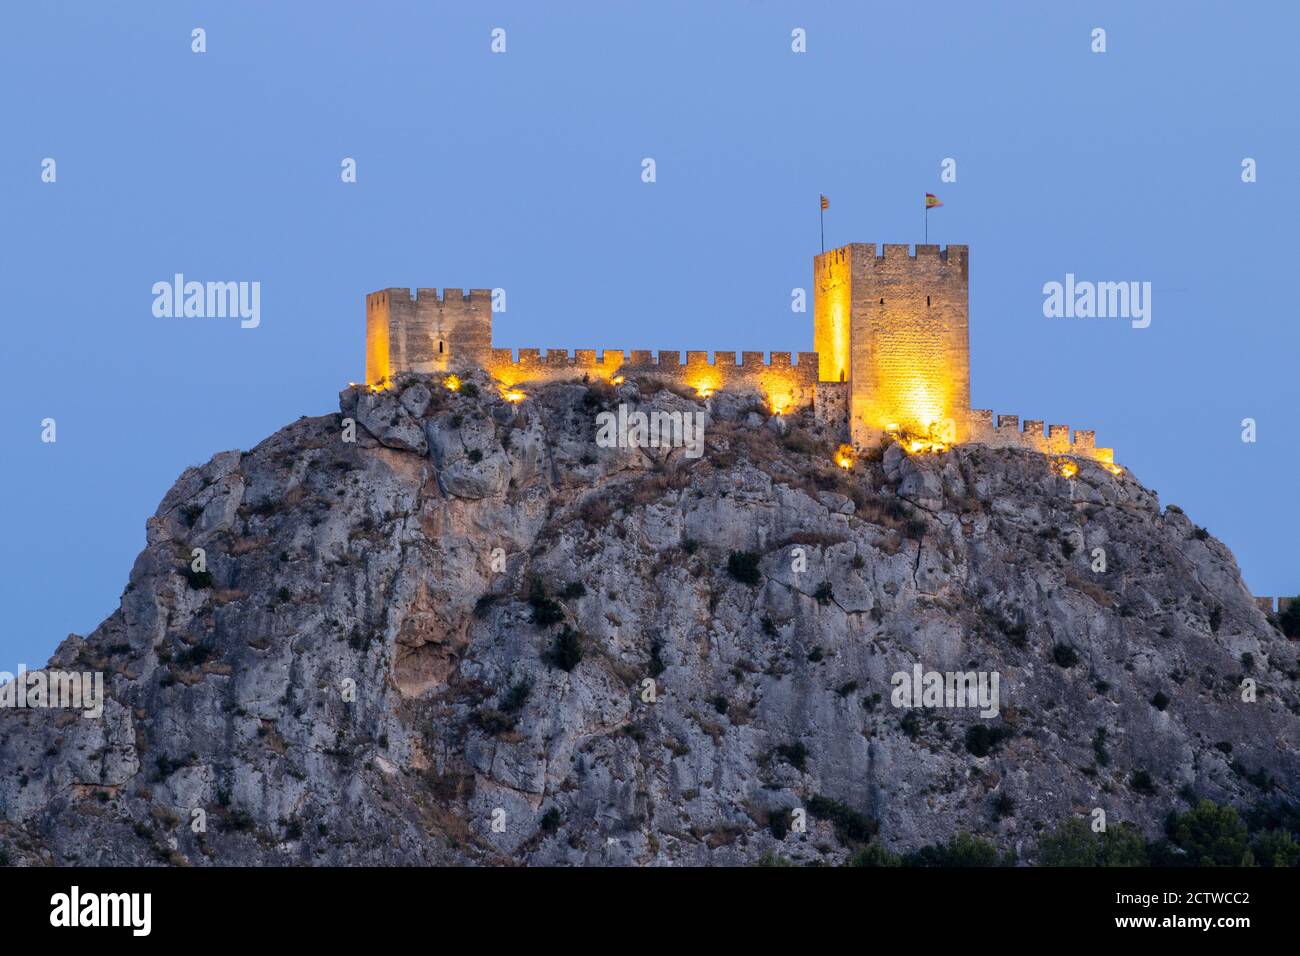 Castillo de Sax on rocks surrounded by lights in the evening in Spain Stock Photo